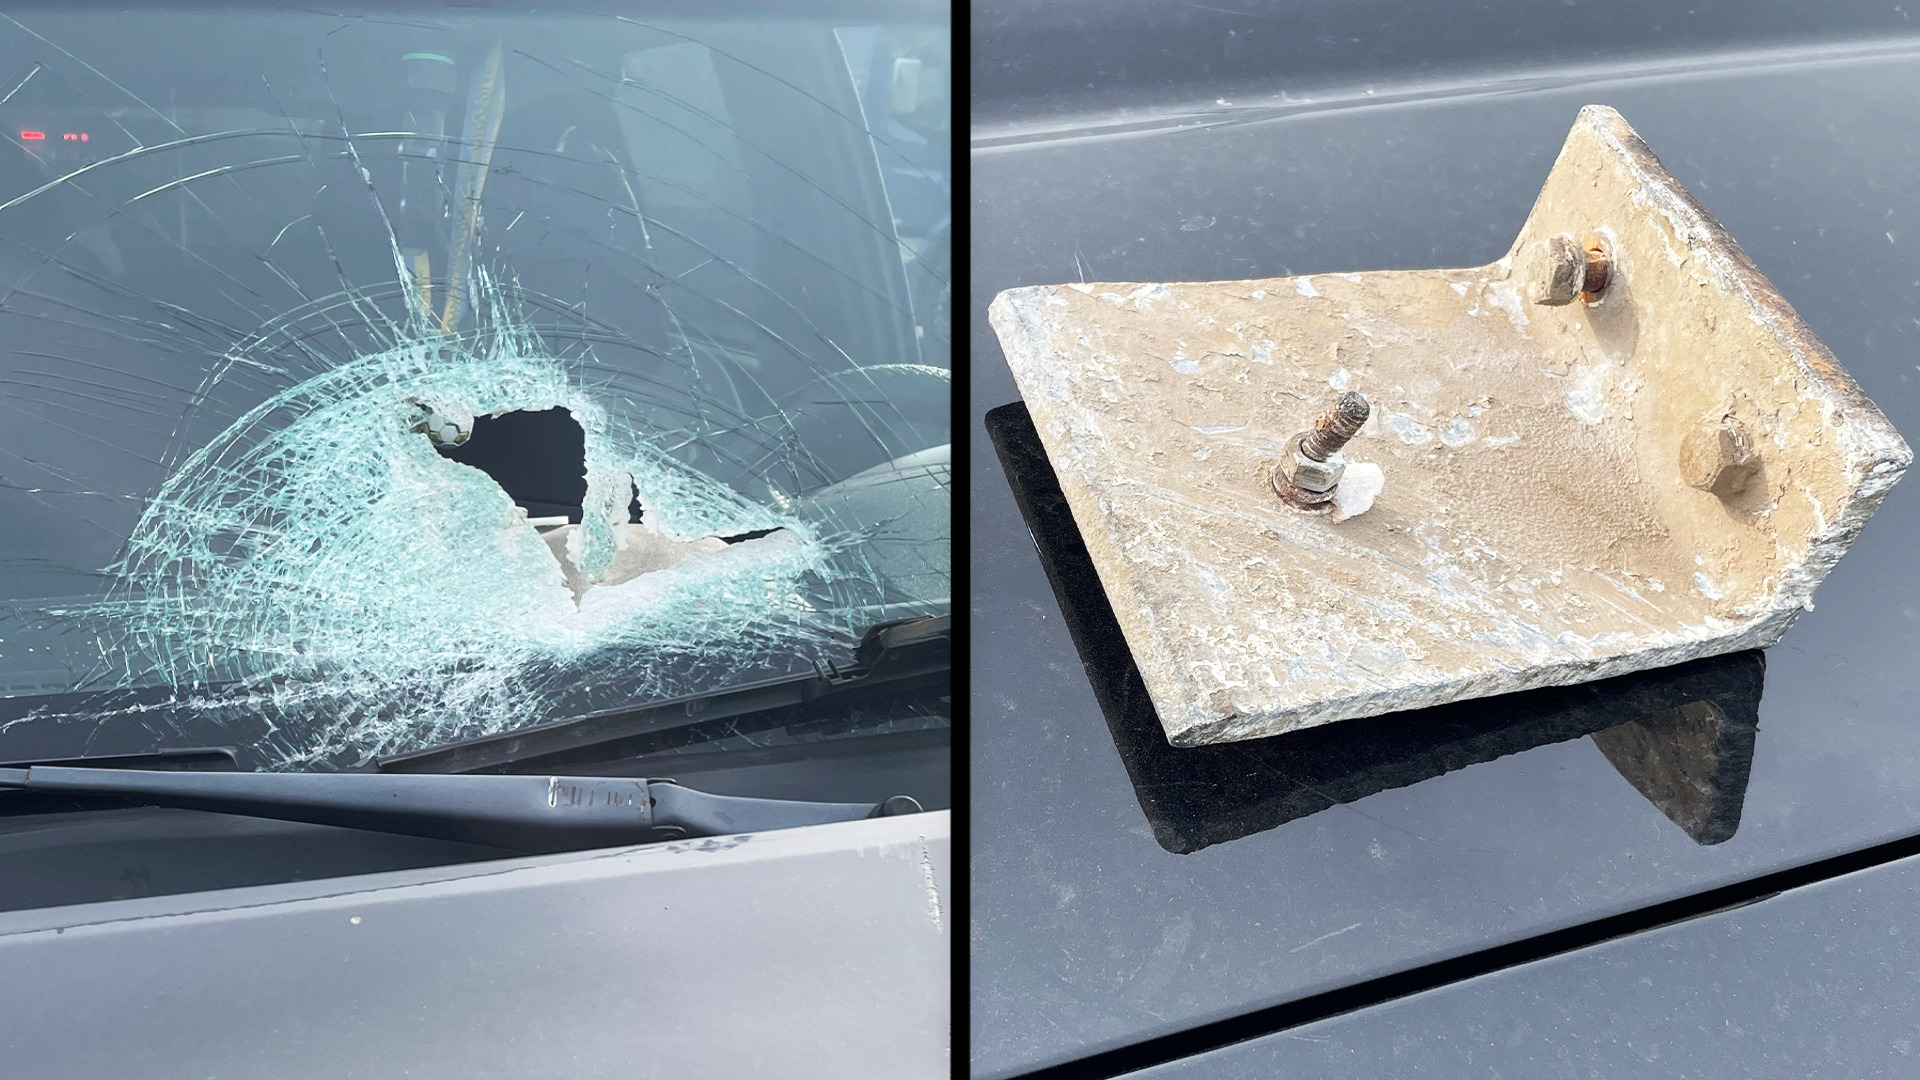 Driver and passenger narrowly escape injury after metal debris strikes windshield